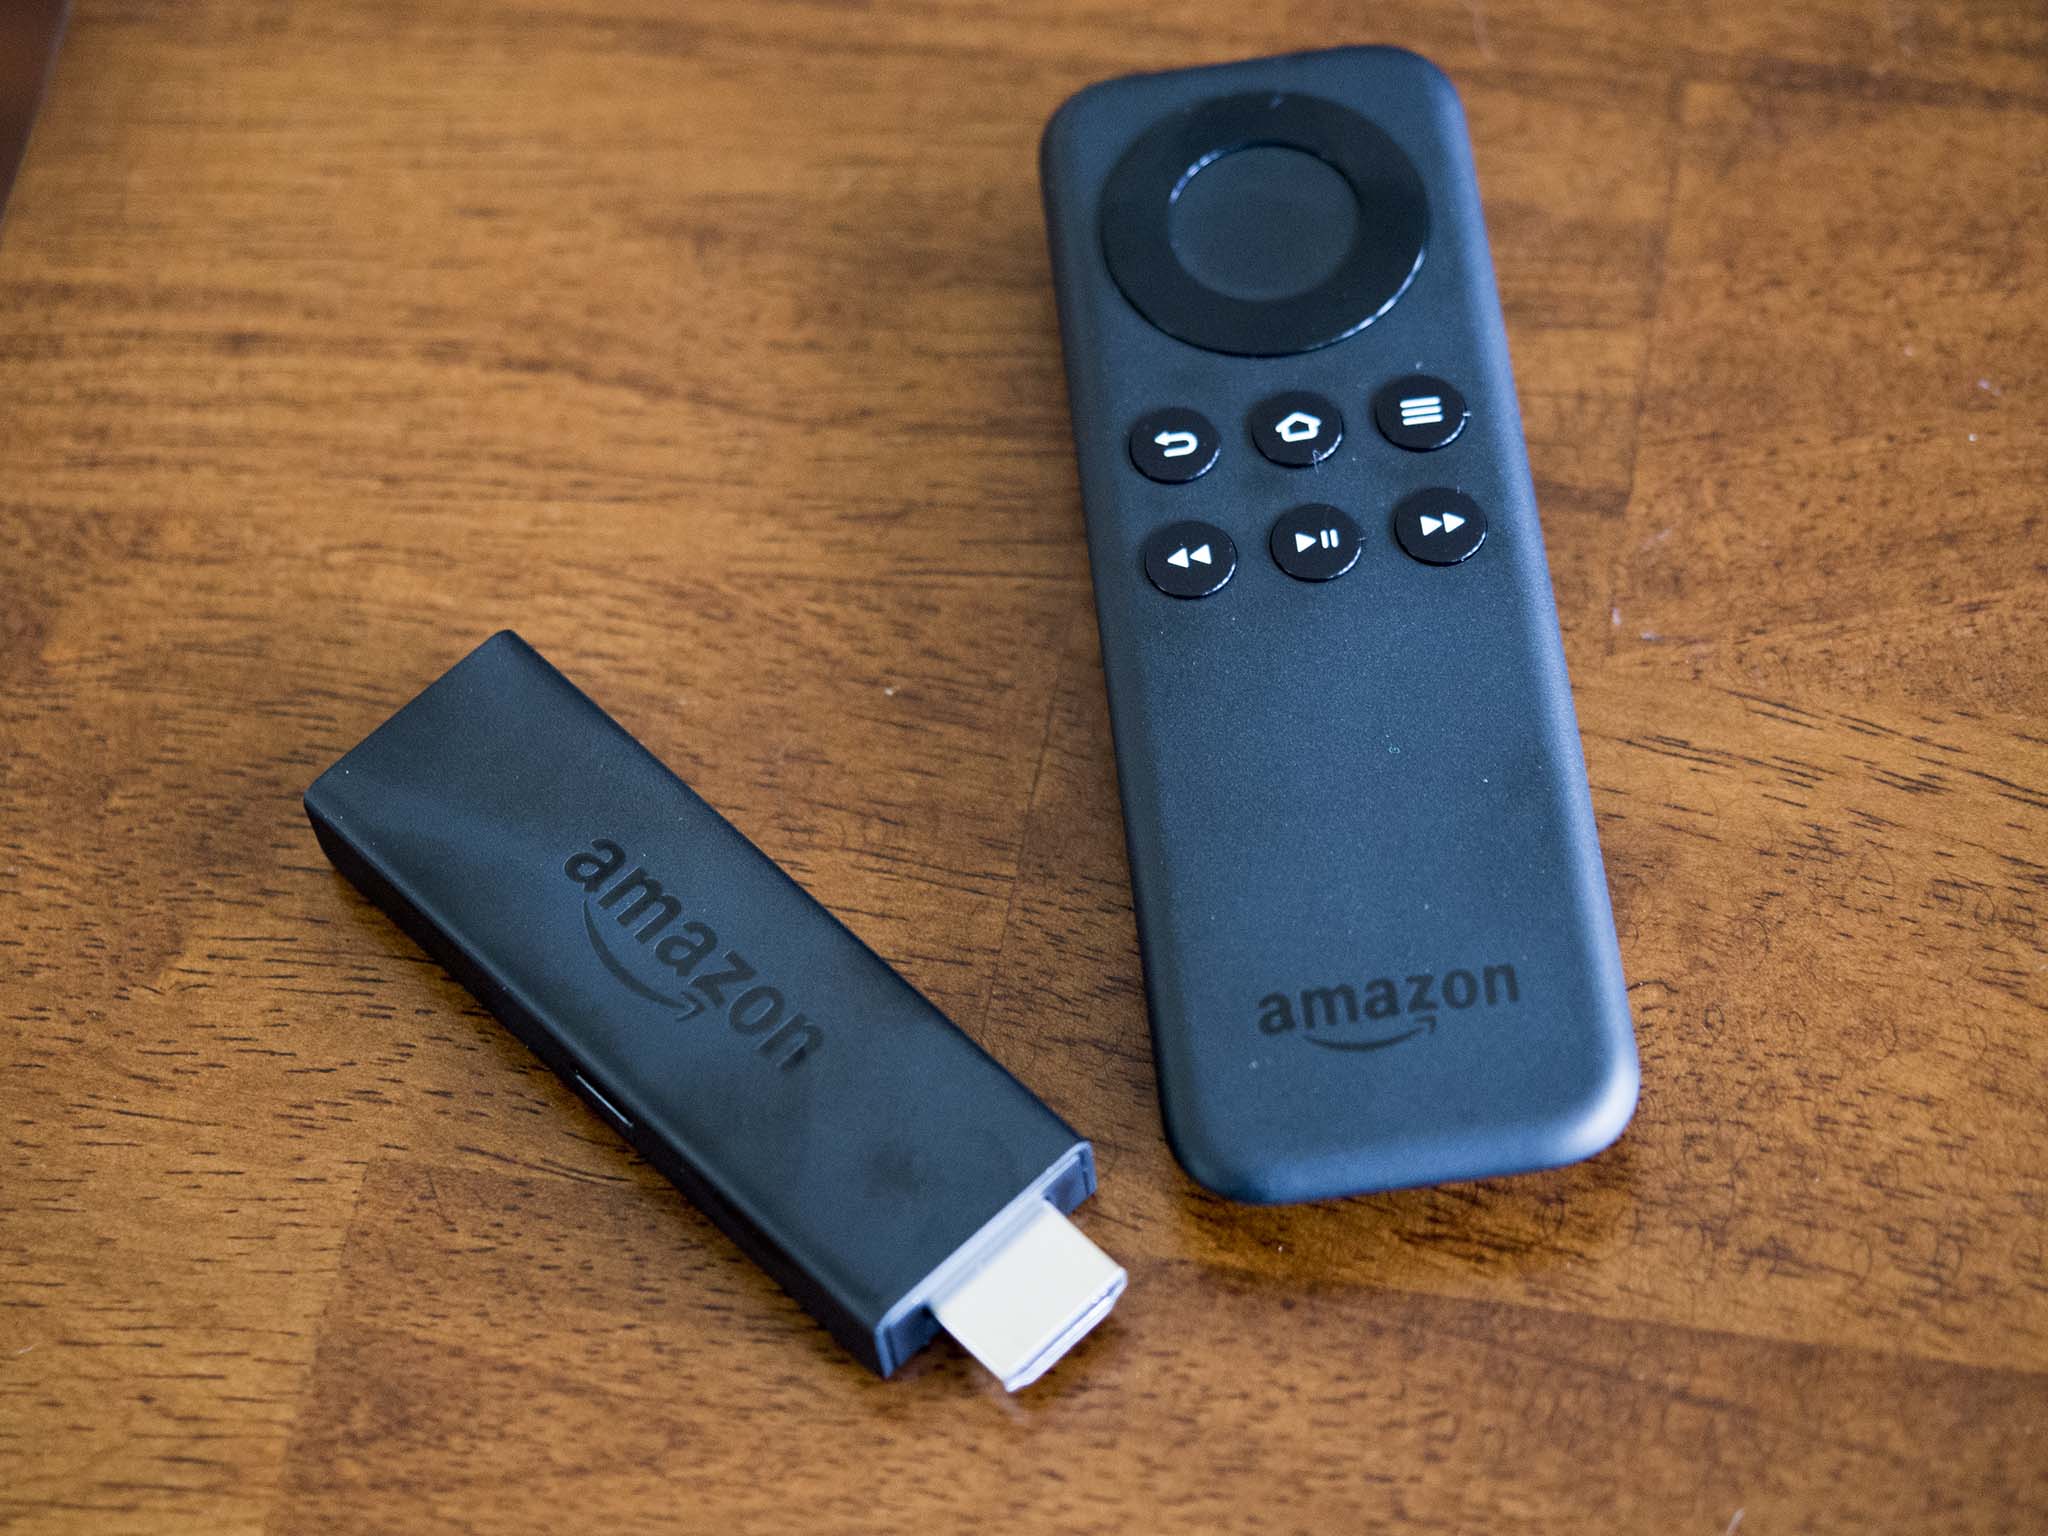 Amazon Fire TV Stick is $25 at Best Buy today only